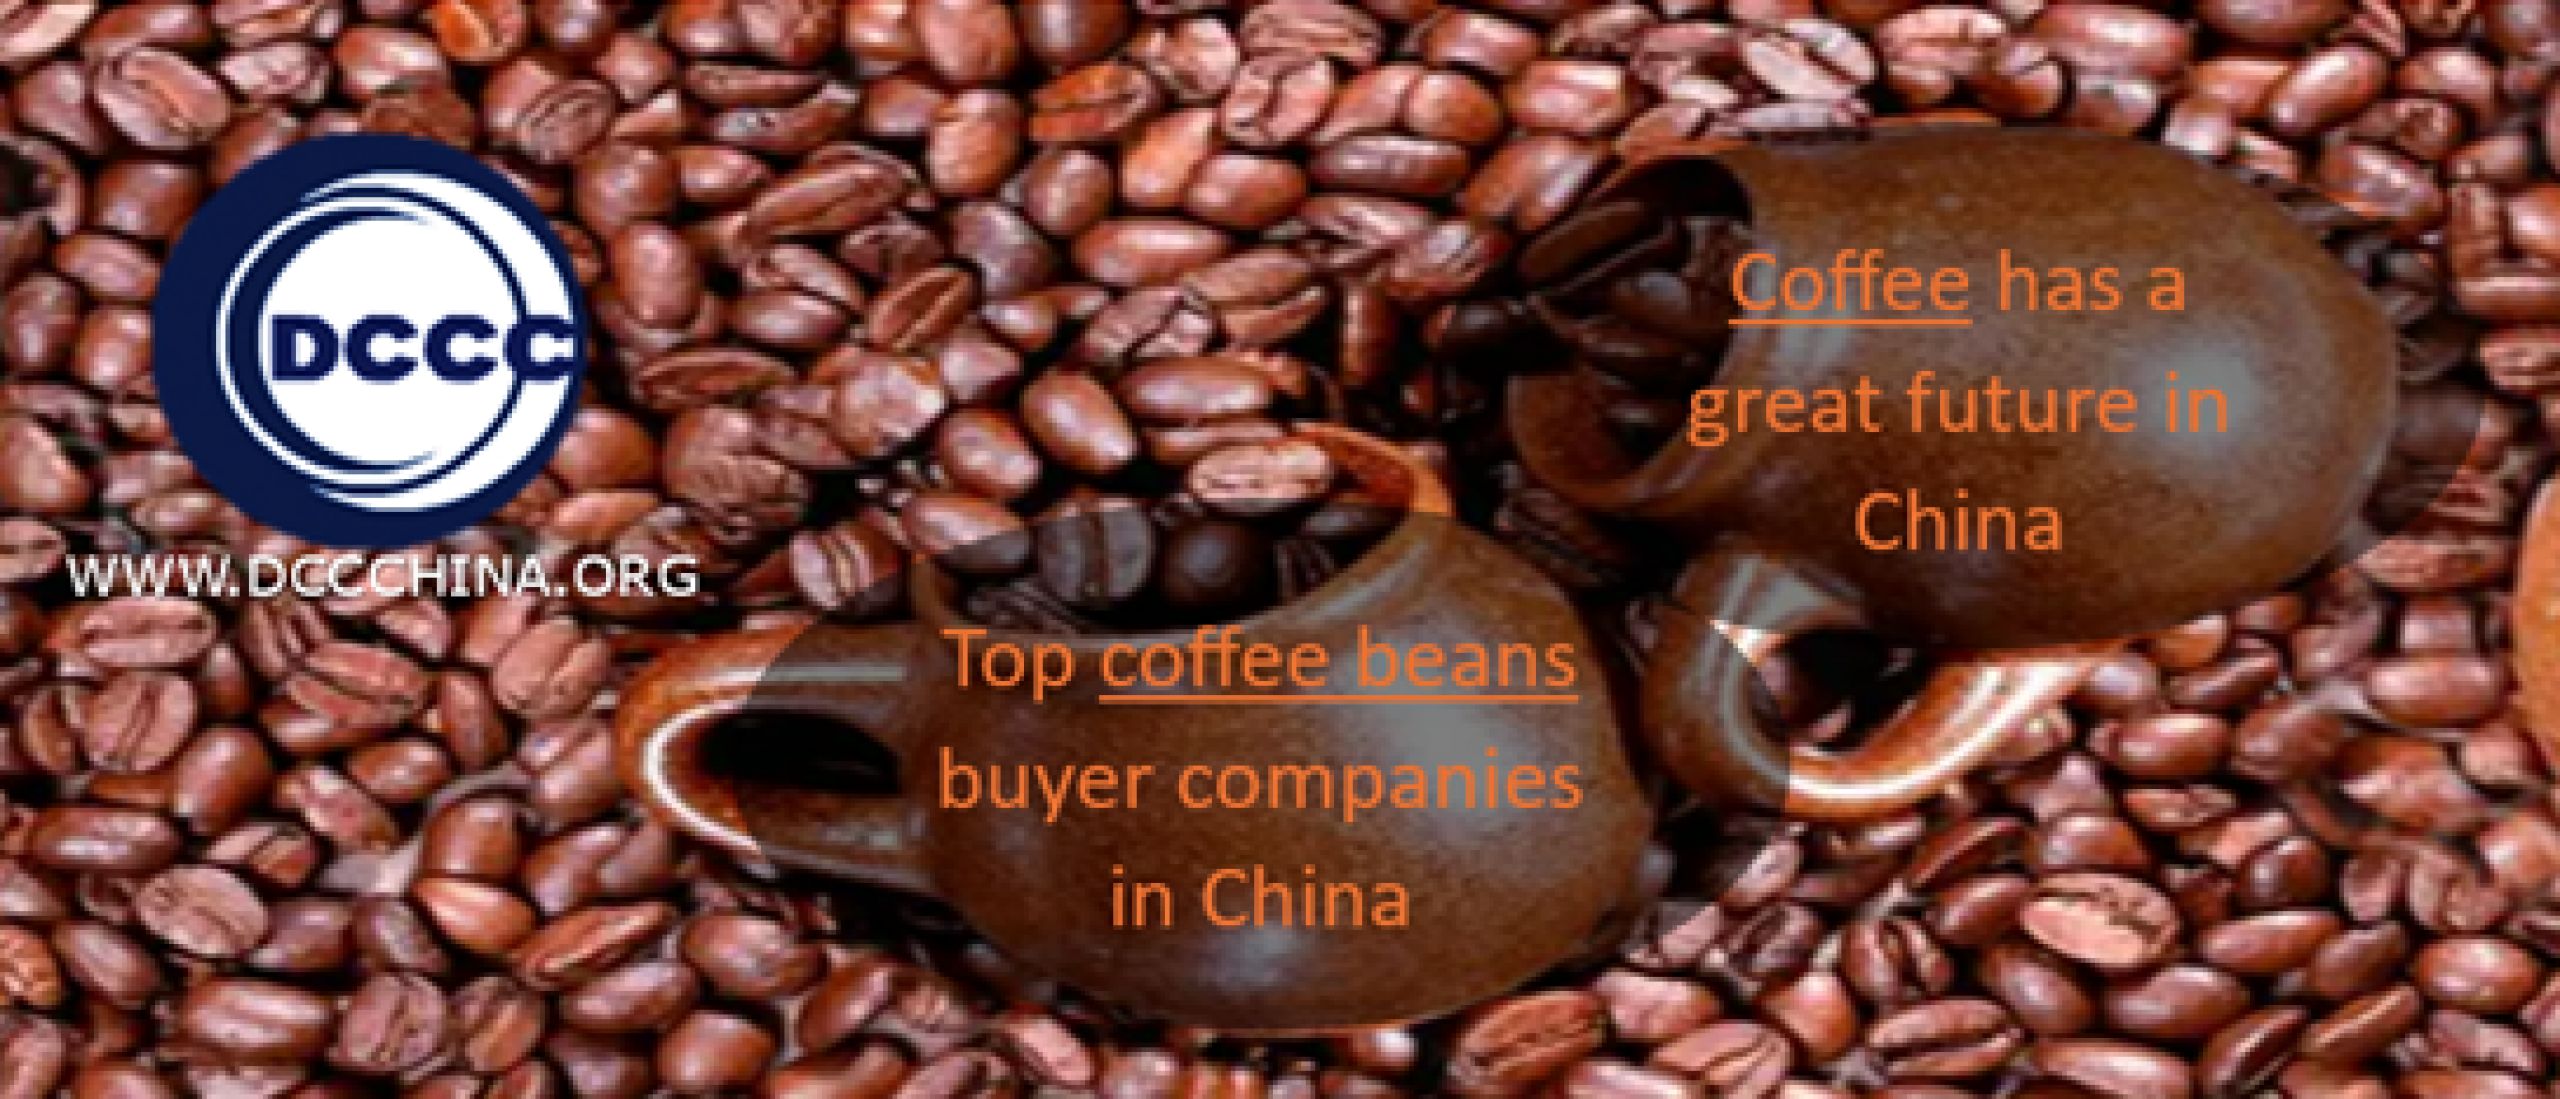 Why coffee have great future in China - case study Luckin Coffee